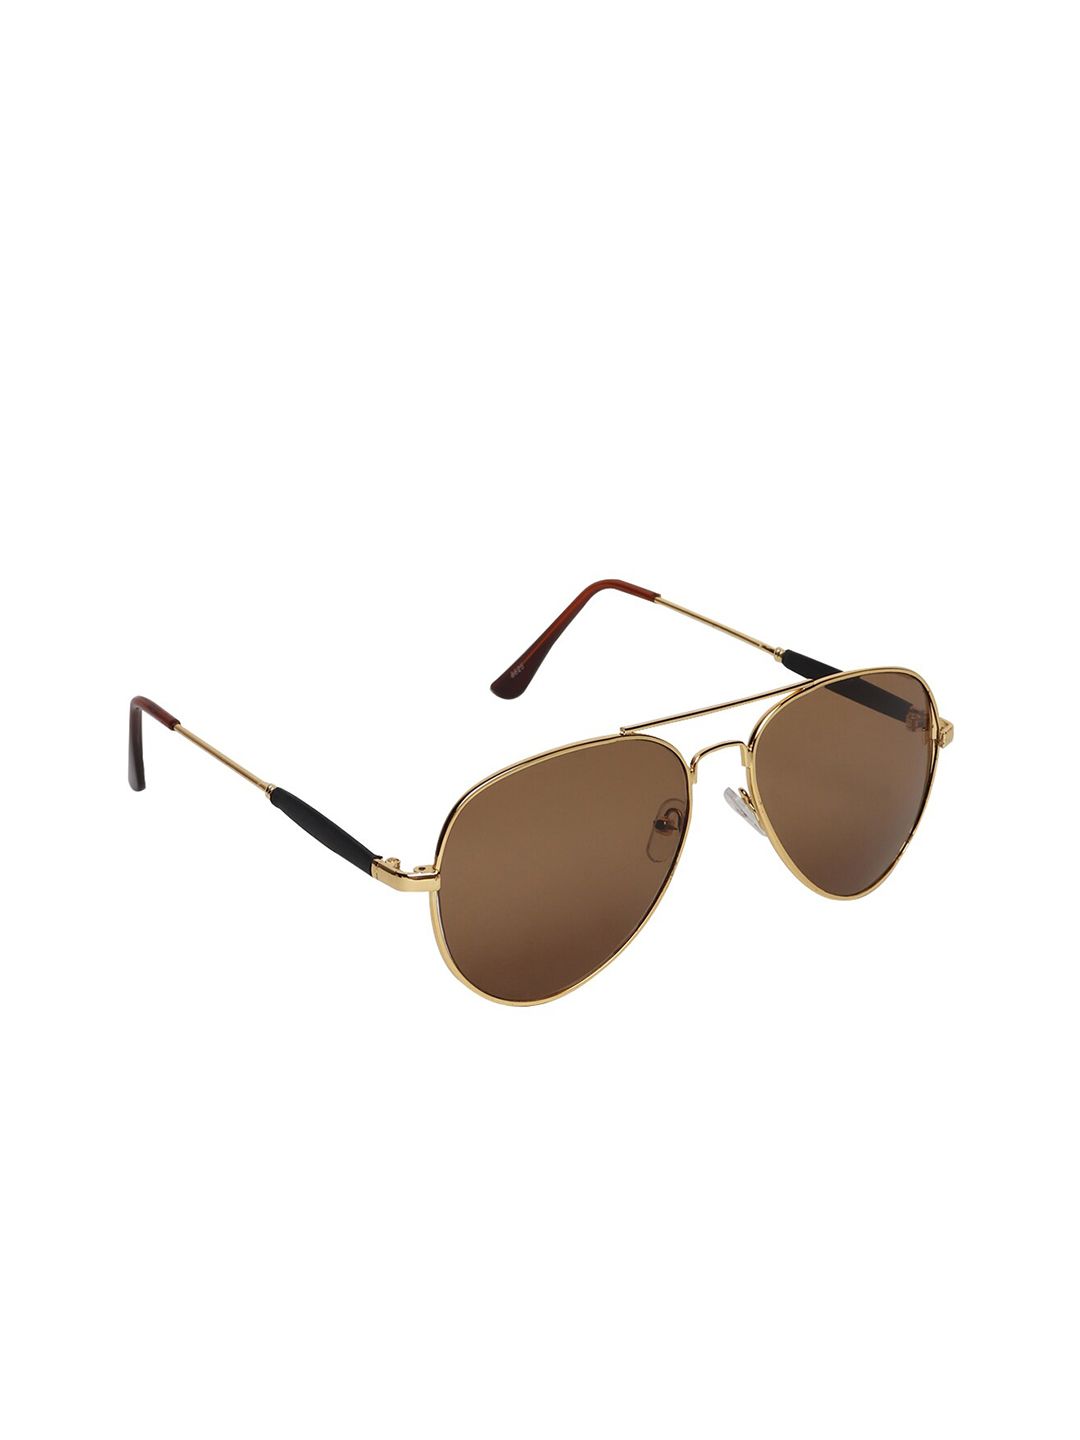 CRIBA Unisex Brown Lens & Gold-Toned Aviator Sunglasses with UV Protected Lens Price in India